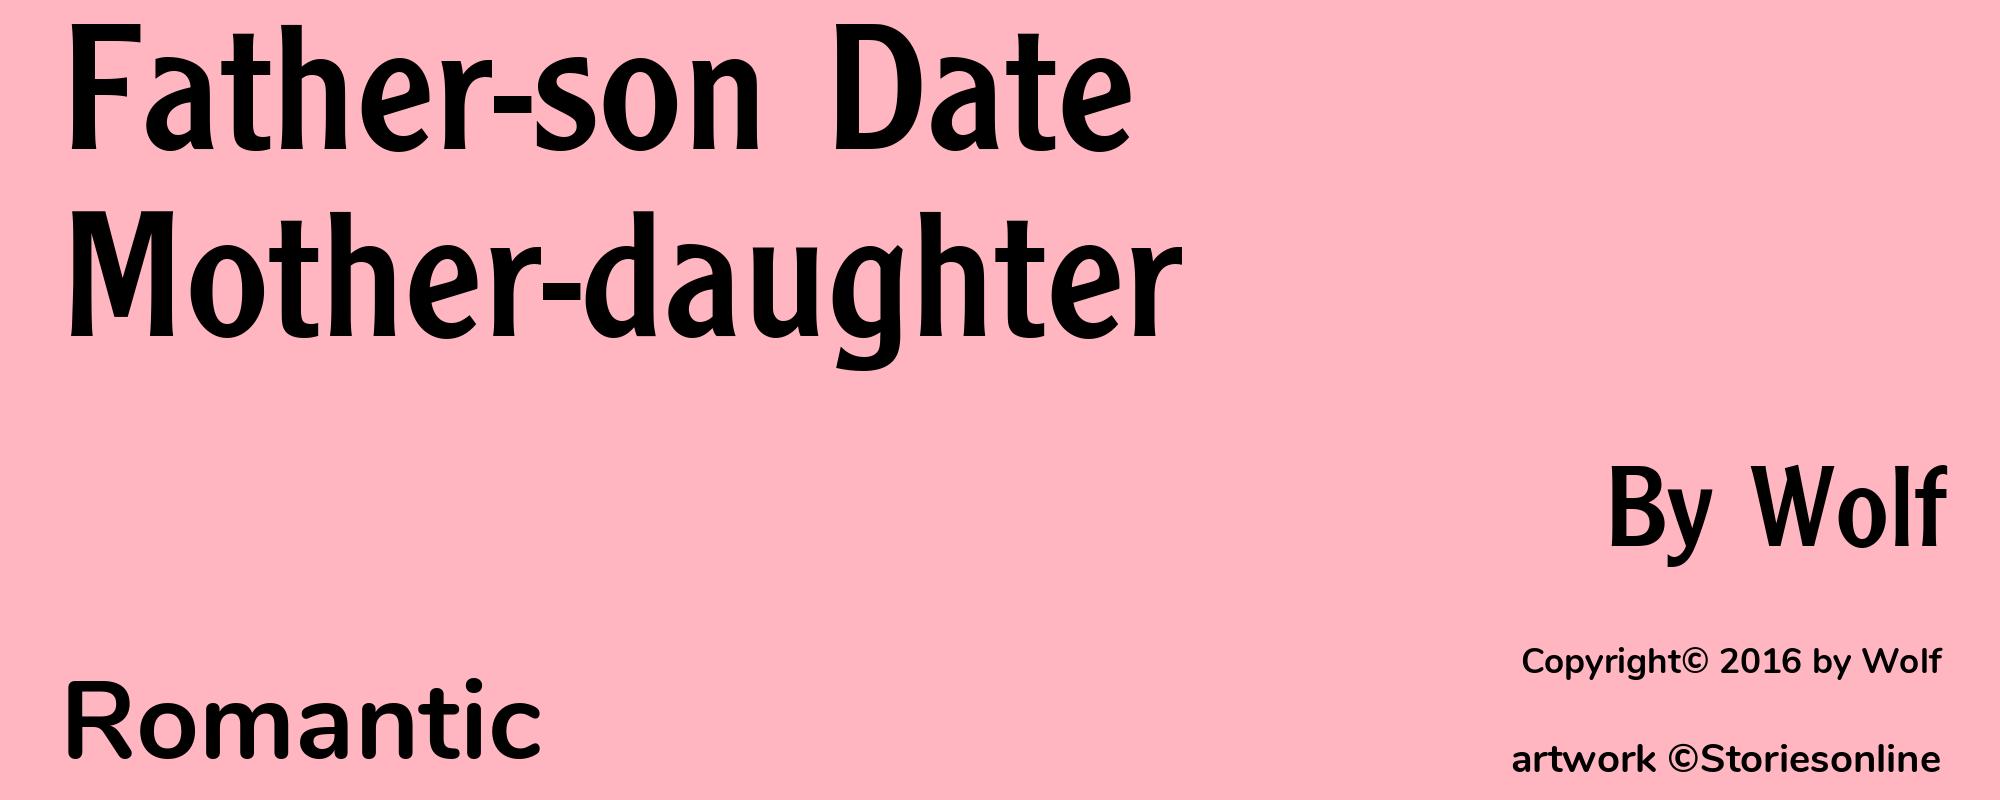 Father-son Date Mother-daughter - Cover